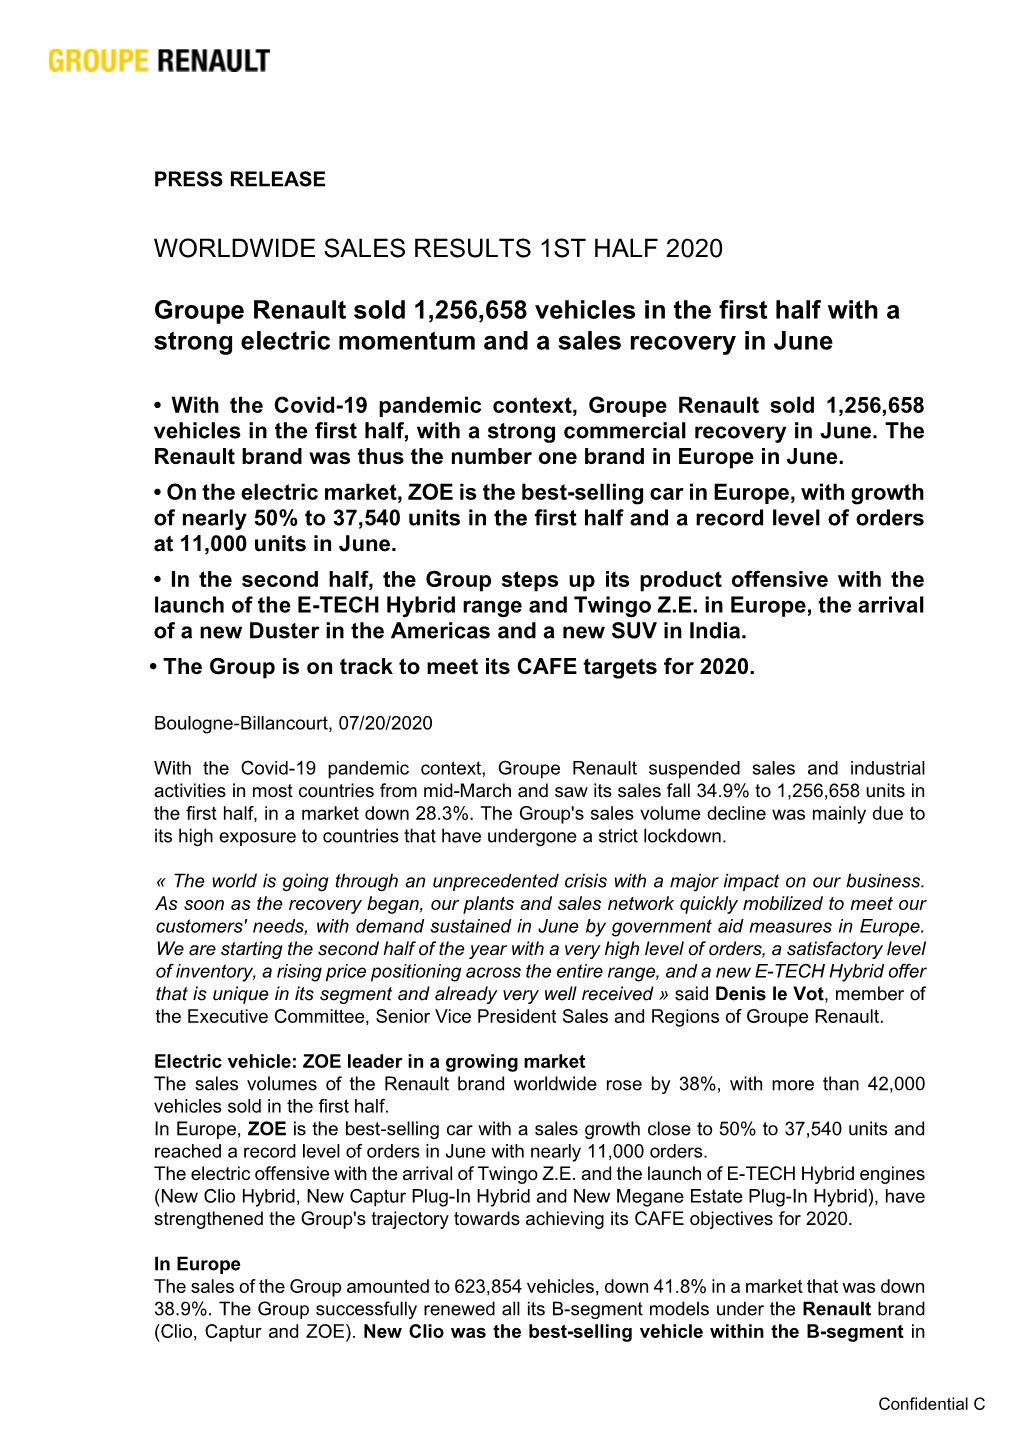 WORLDWIDE SALES RESULTS 1ST HALF 2020 Groupe Renault Sold